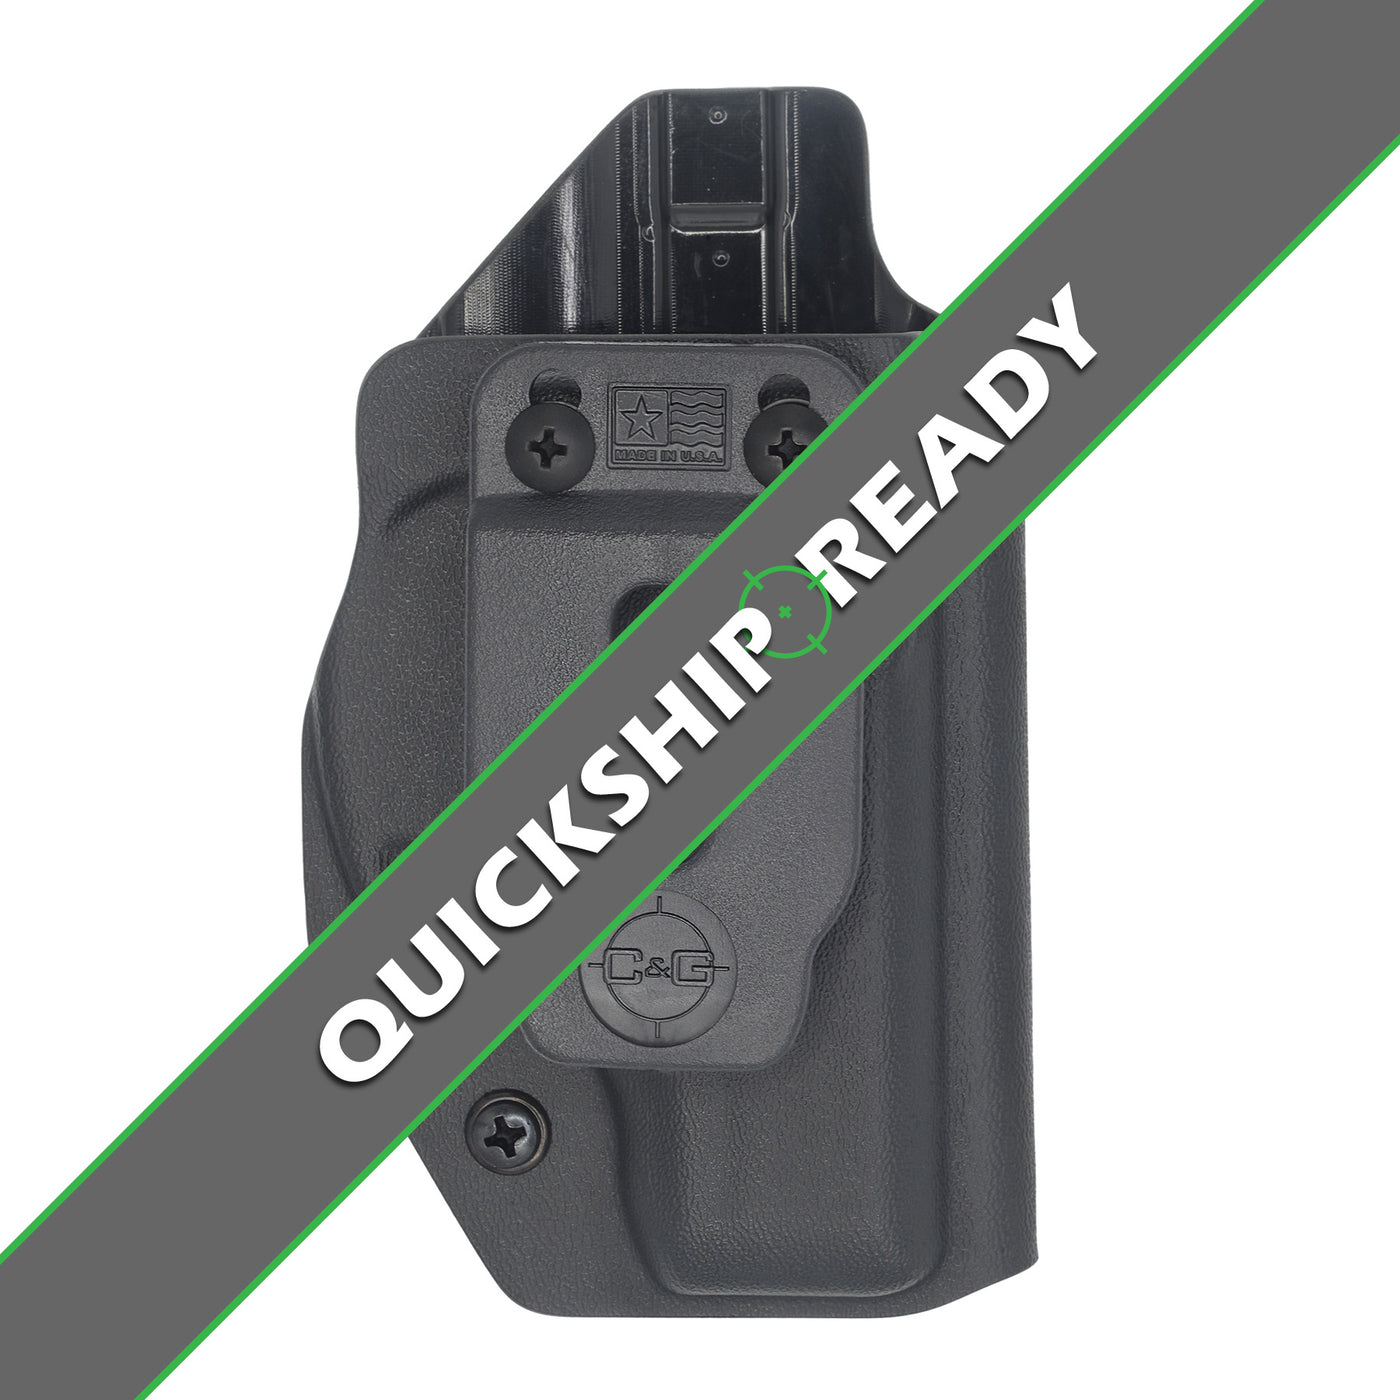 C&G Holsters quickship IWB inside the waistband Holster for the Ruger LC9 EC9